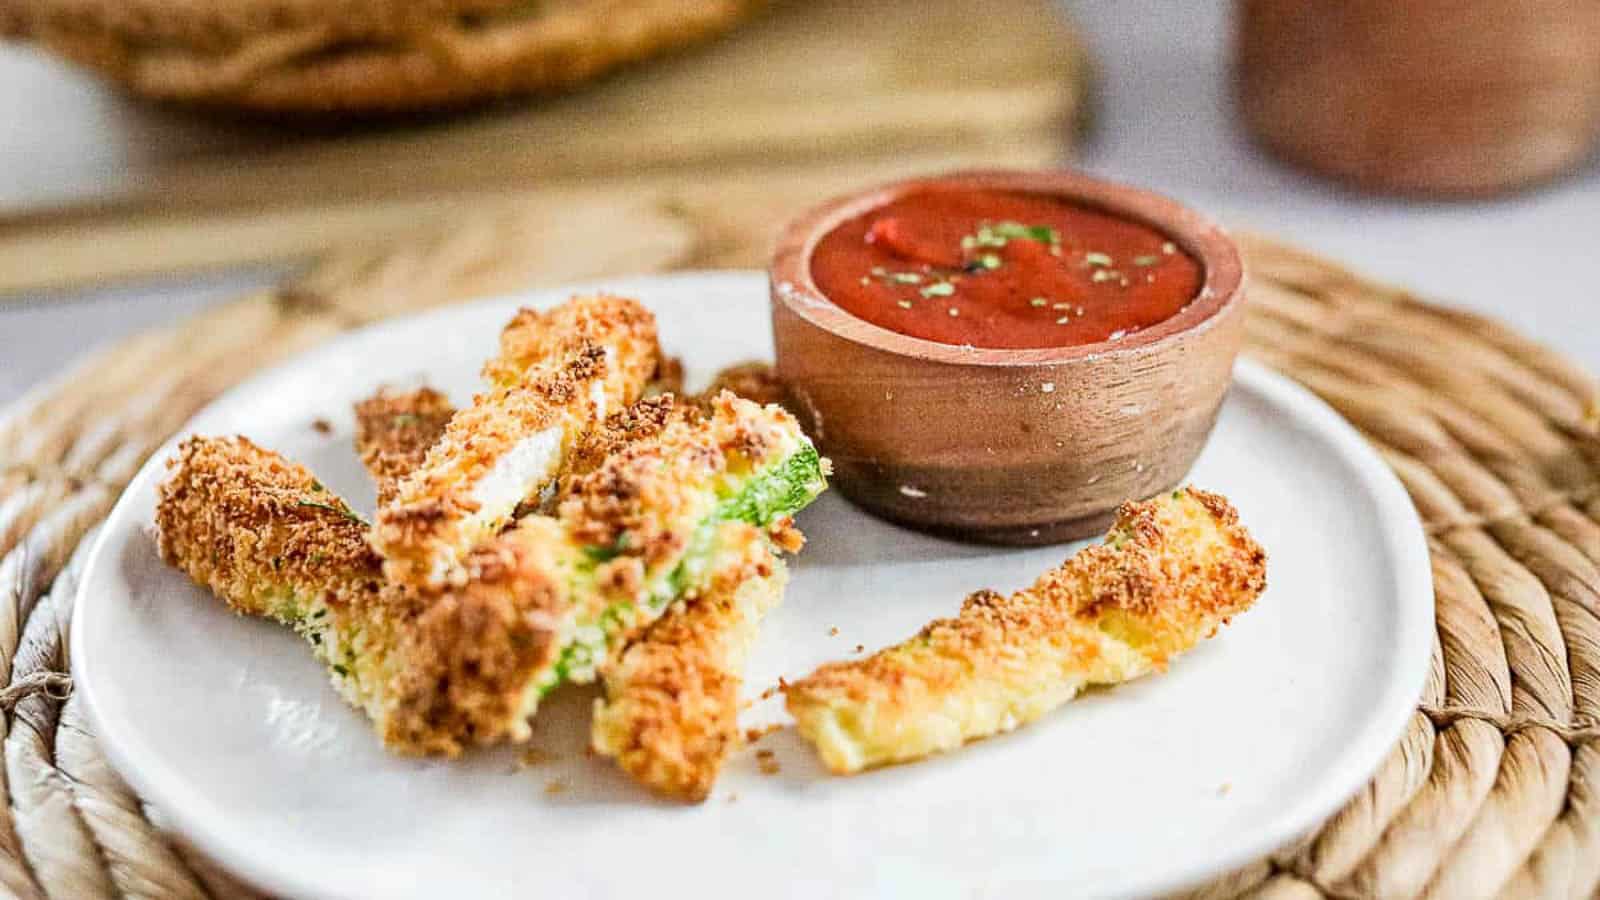 Zucchini fries on a plate with spicy ketchup for dipping.